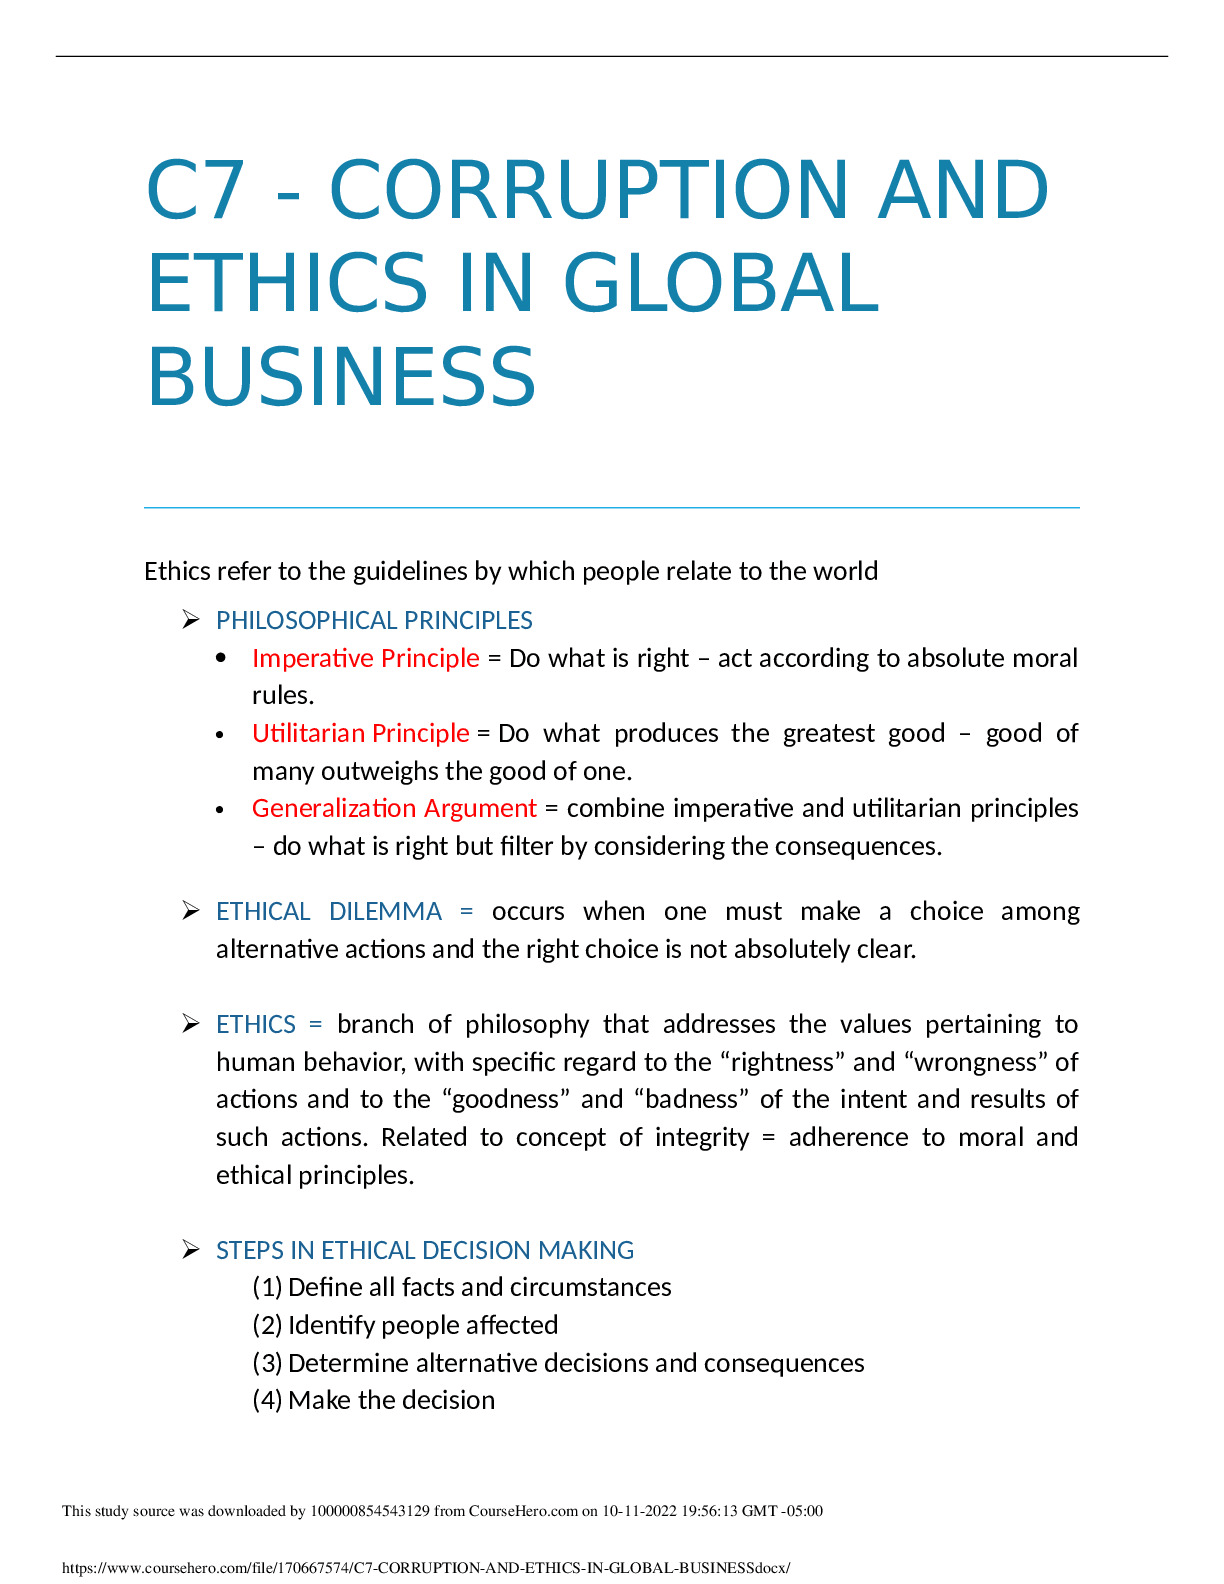 C7_CORRUPTION_AND_ETHICS_IN_GLOBAL_BUSINESS.docx